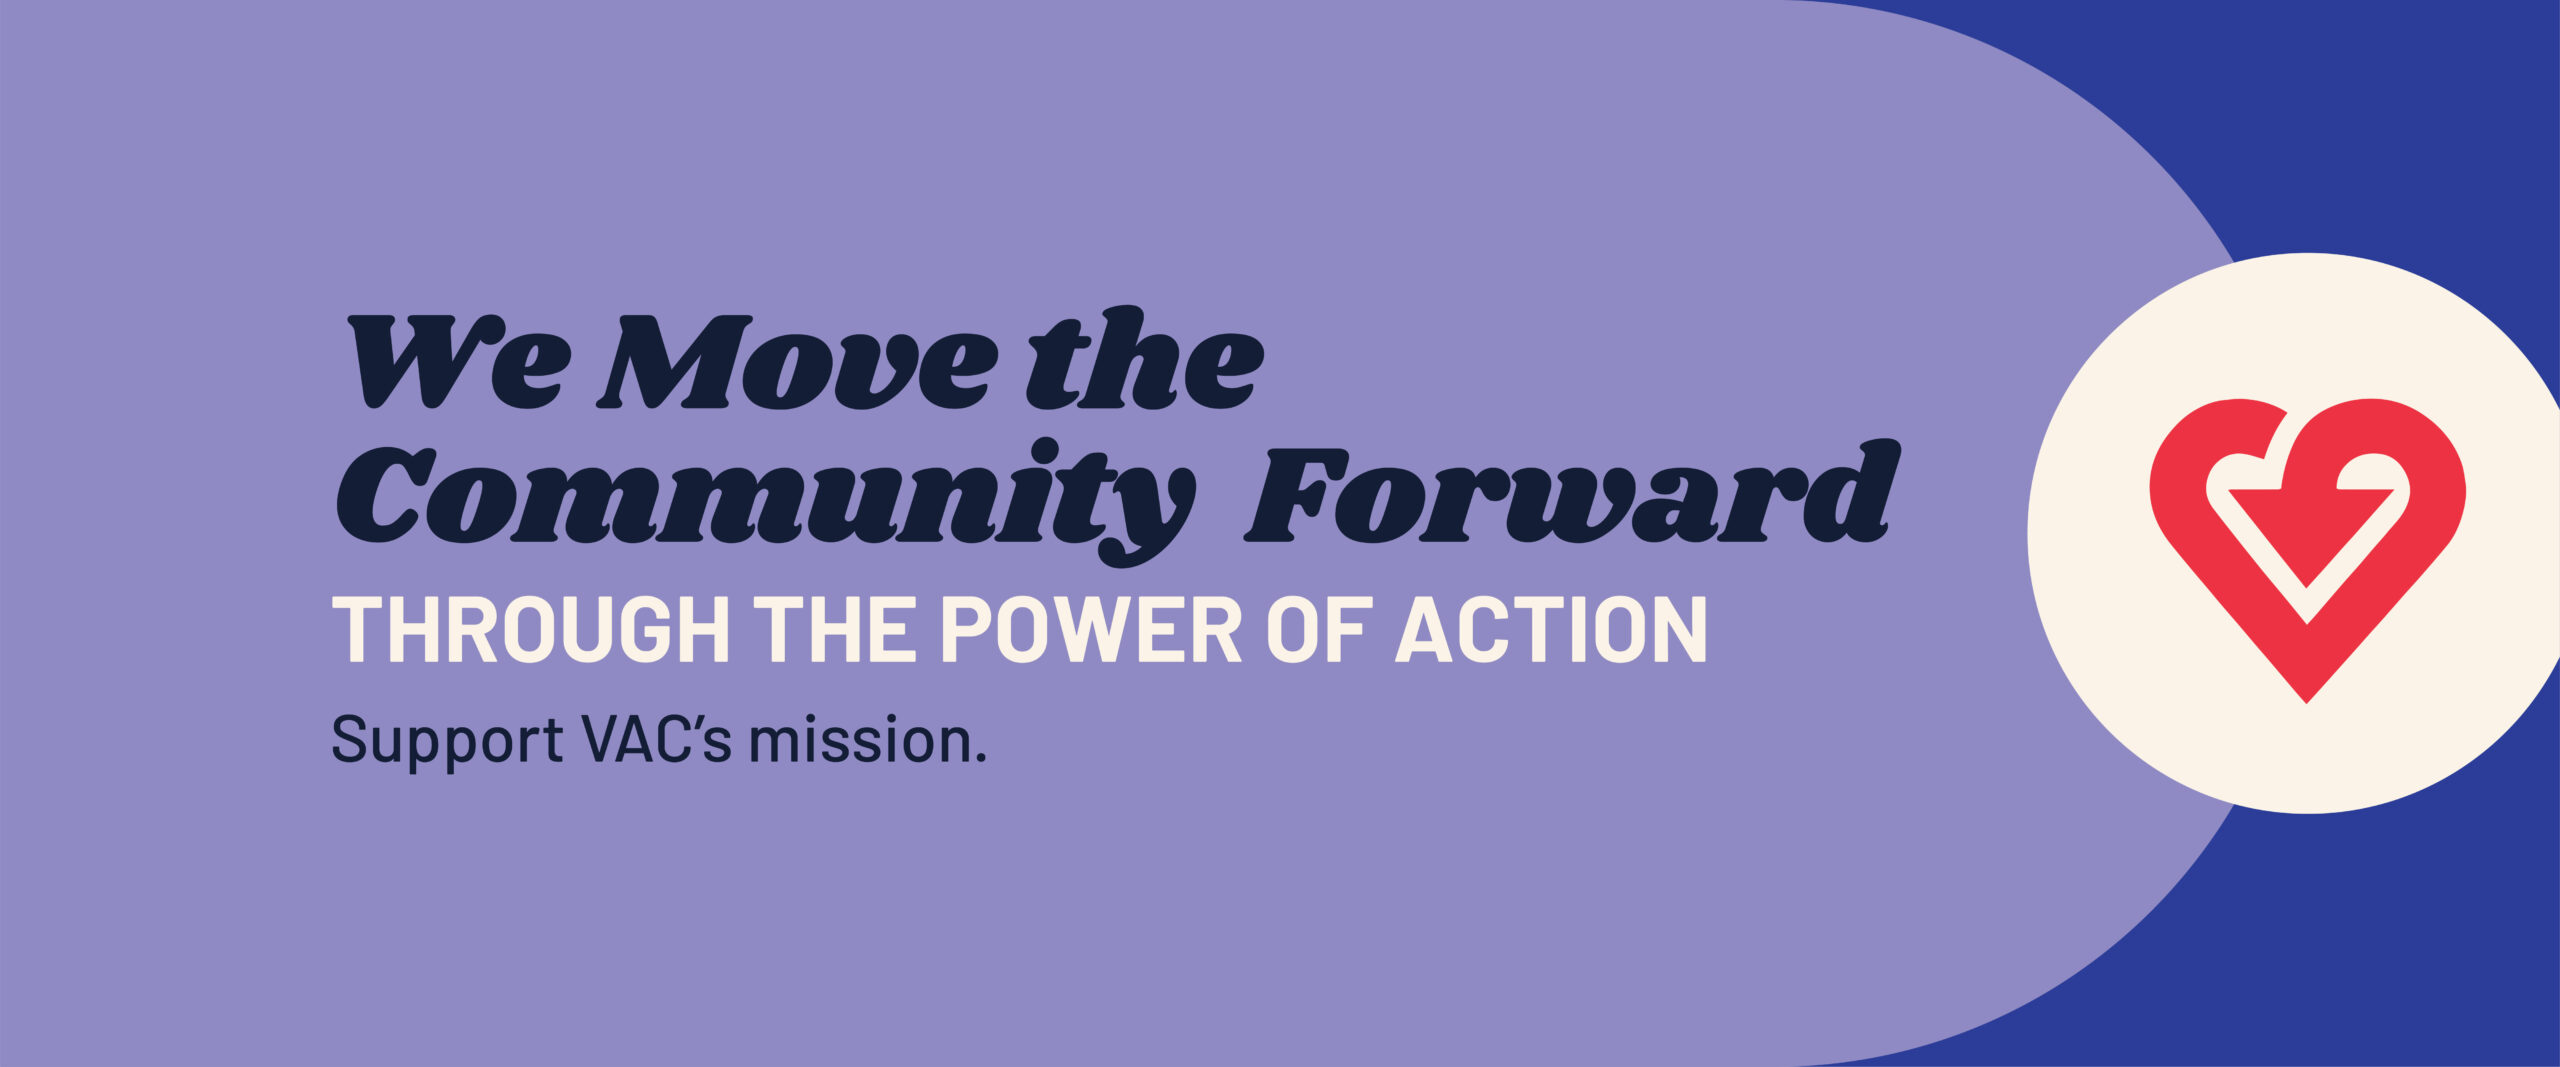 We move the community forward through the power of action. Support VAC;s mission.